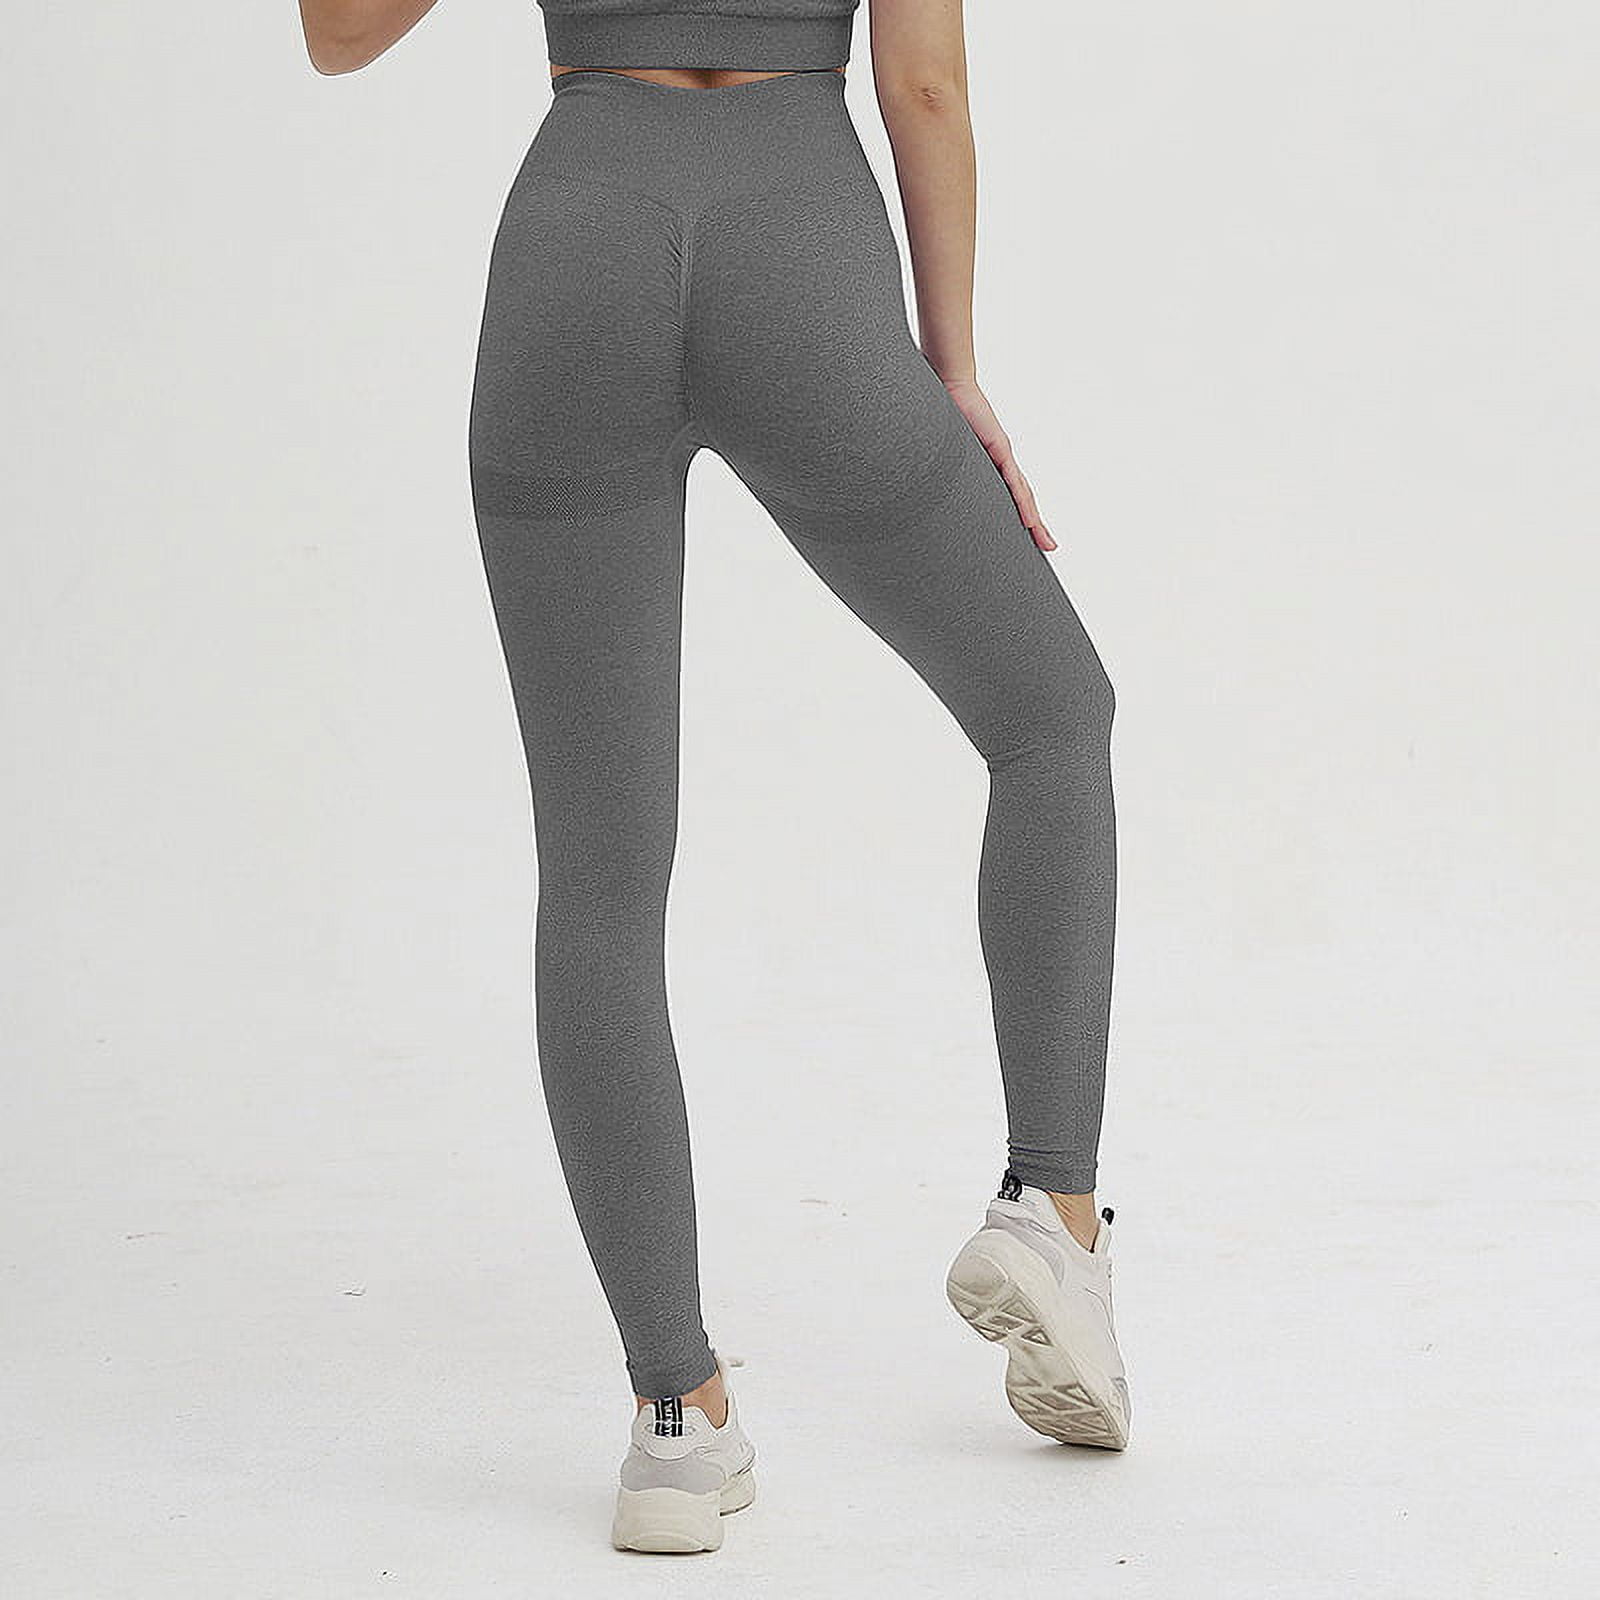 Trying size S-L - Aliexpress new seamless sets // Gymshark